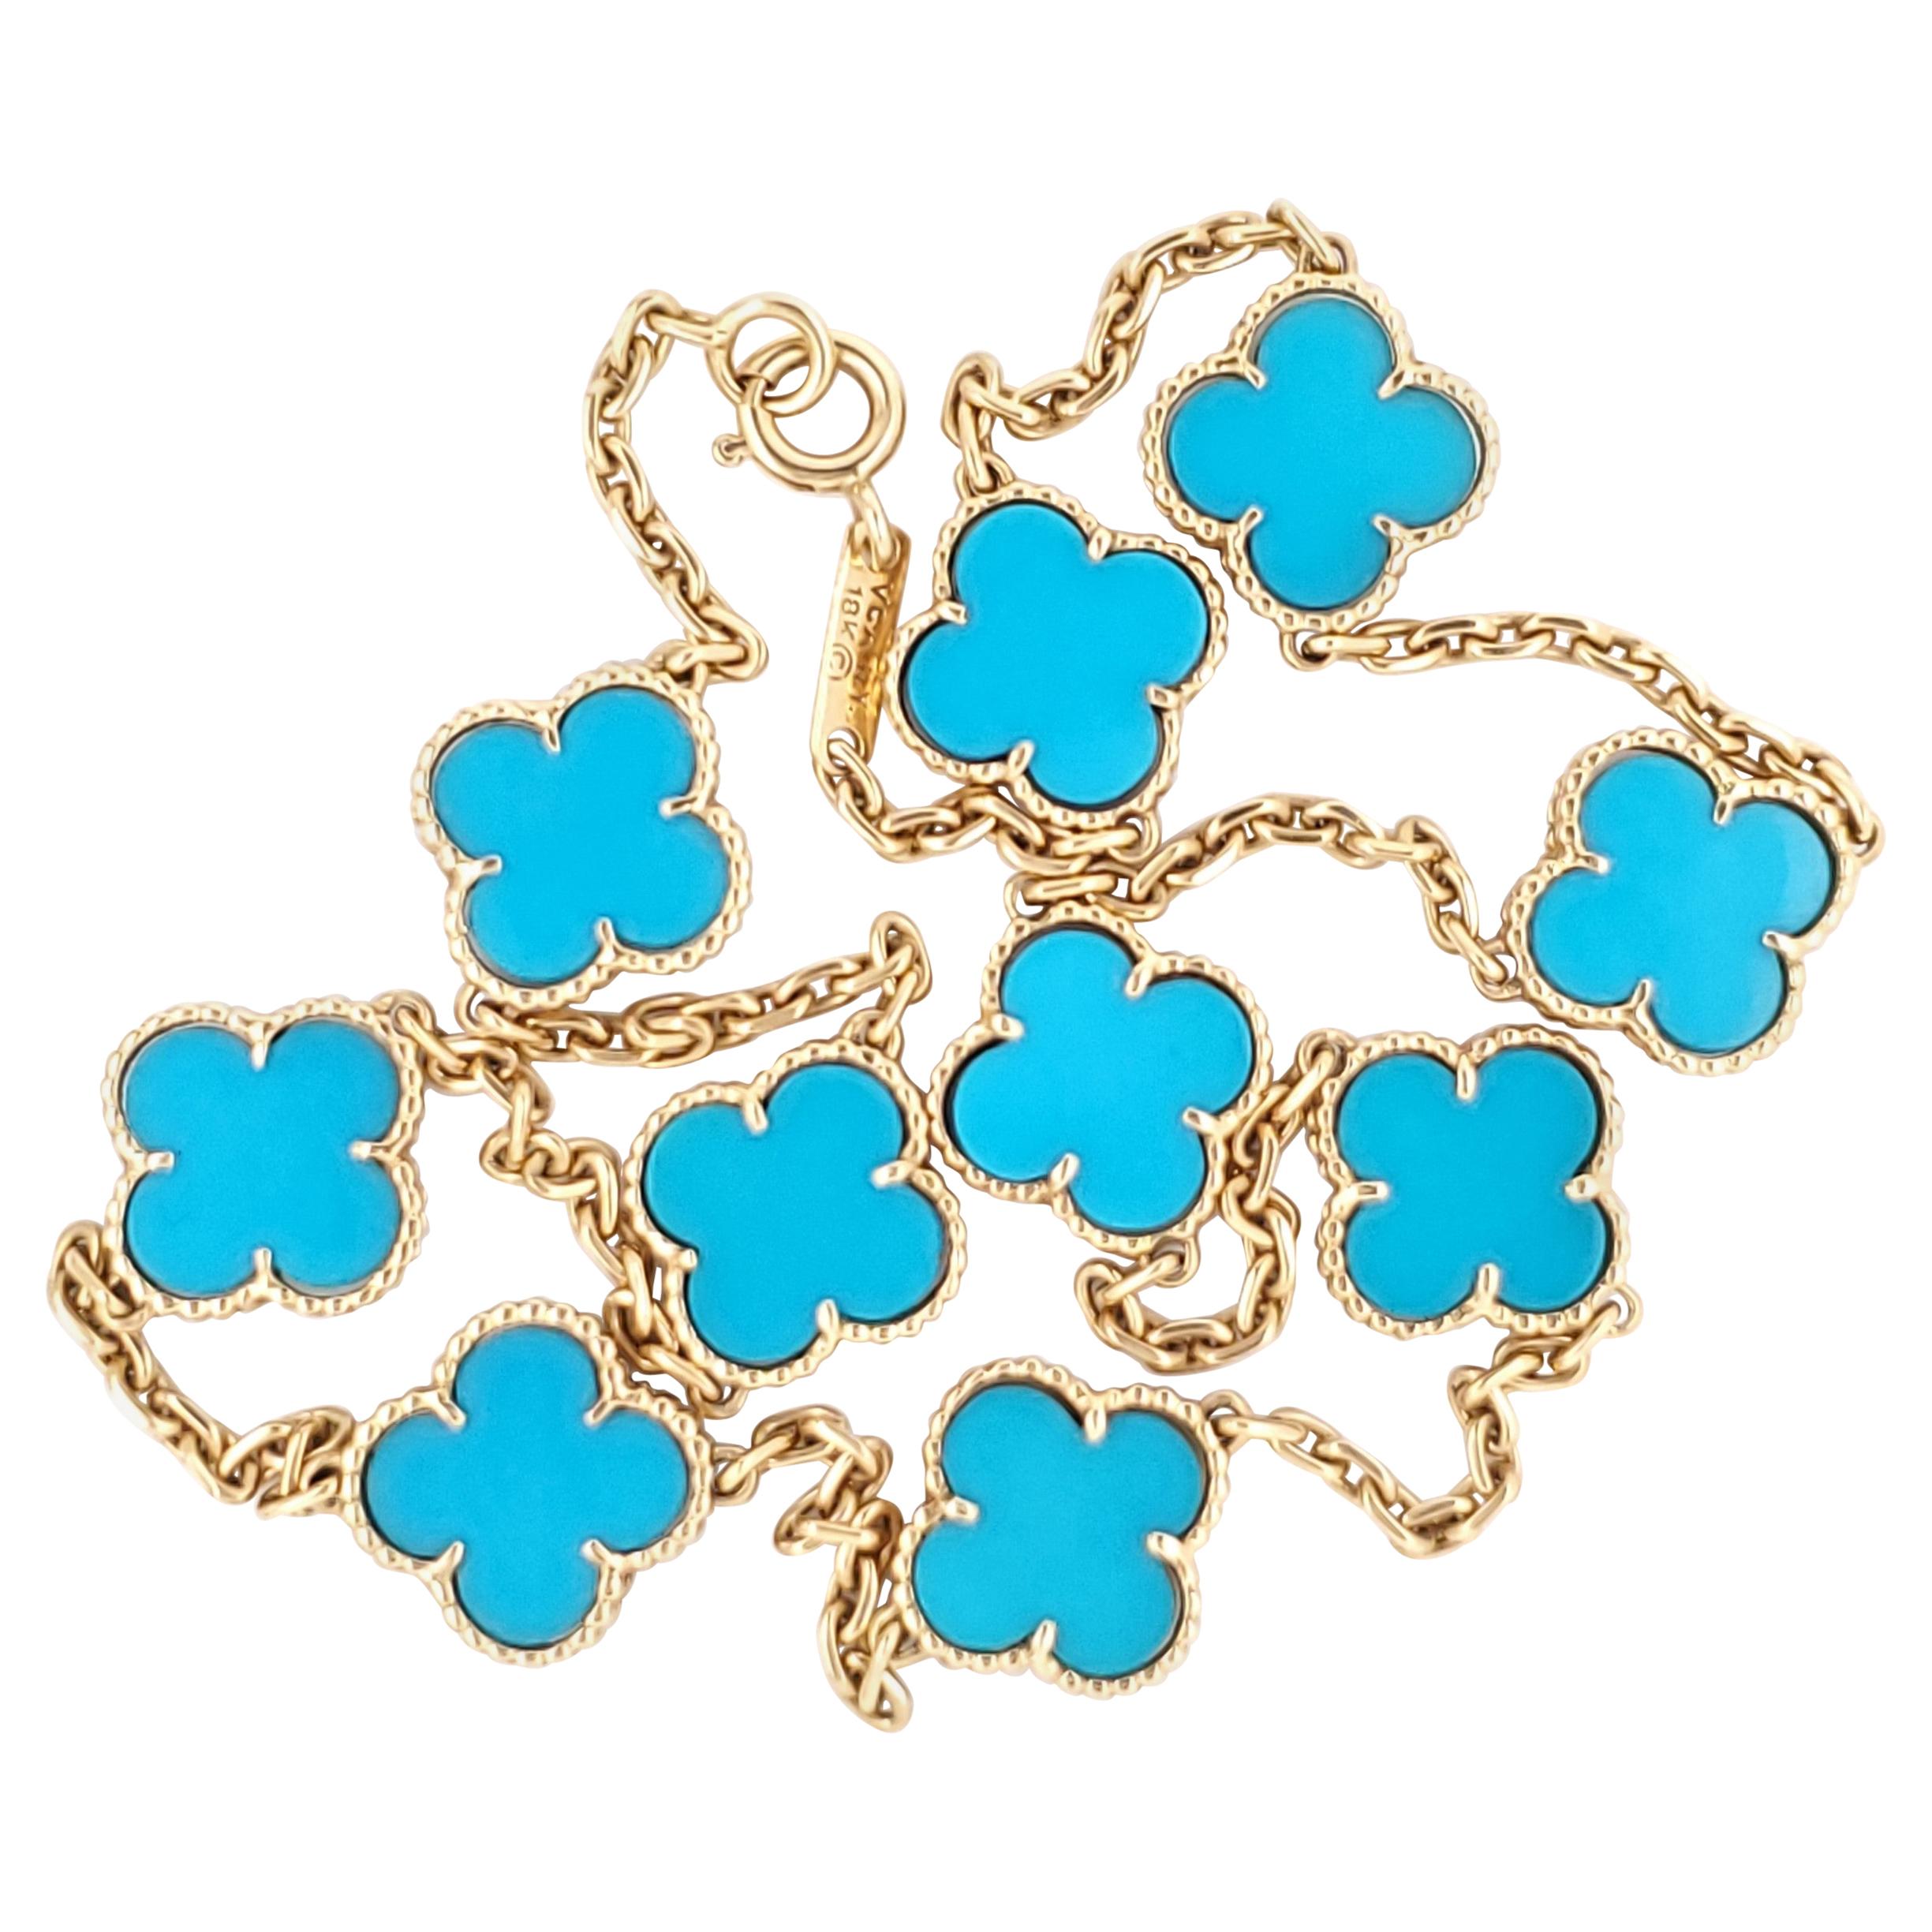 Vintage fake Van Cleef & Arpels Alhambra necklace yellow gold 10 motifs  turquoise : vancleef-jewelry